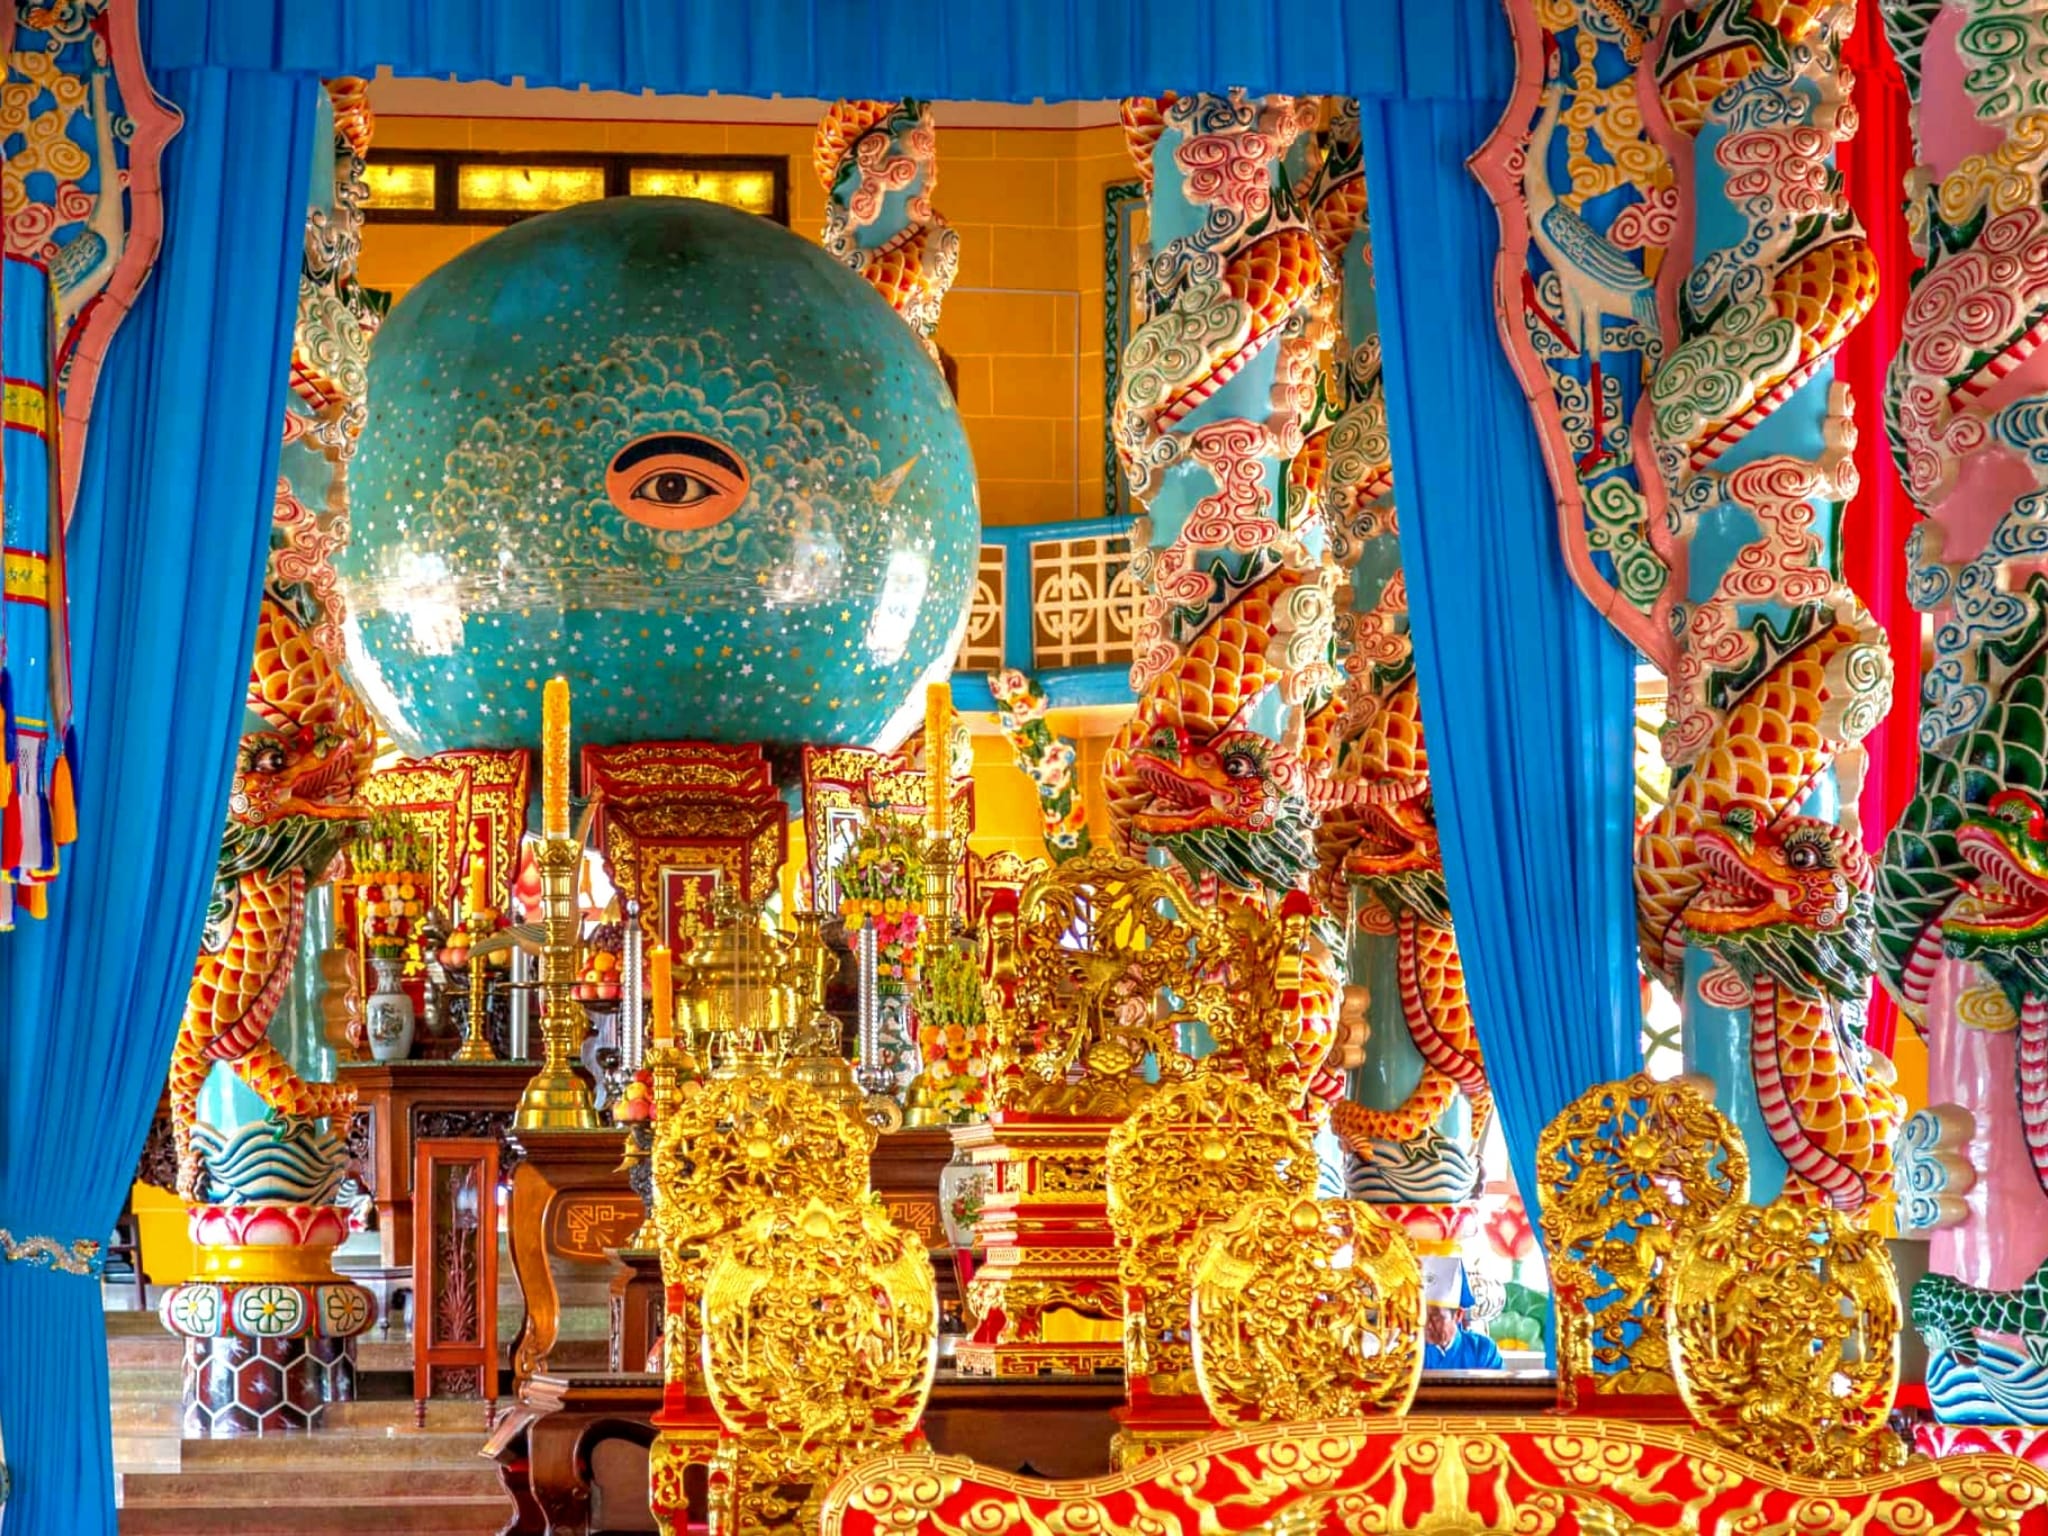 SG15: CAO DAI TEMPLE & BLACK LADY MOUNTAIN ONE DAY TRIP